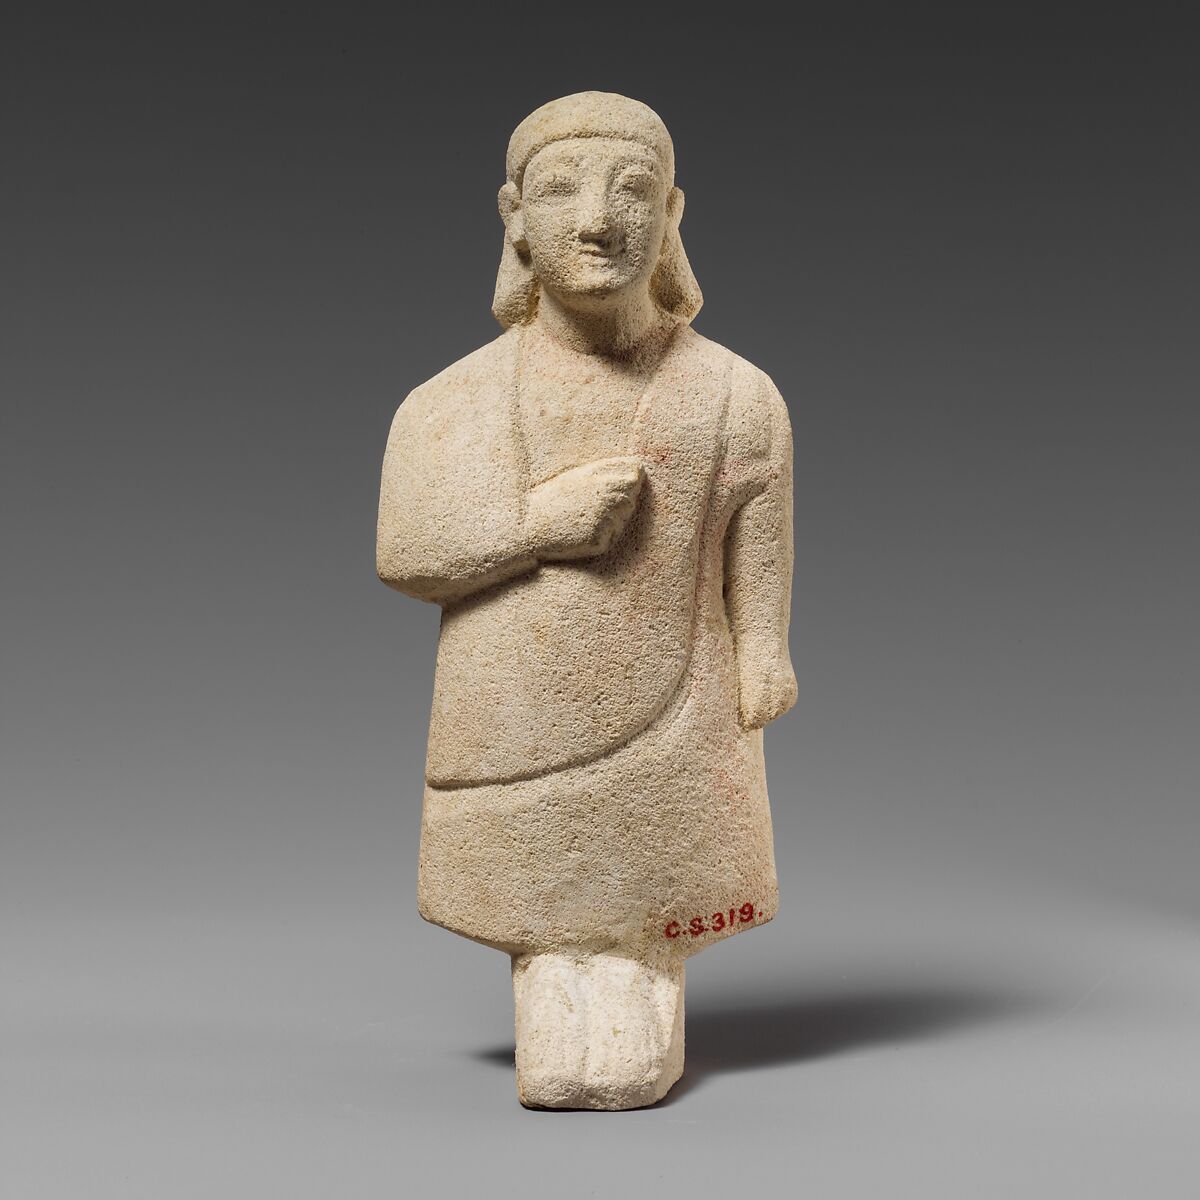 Limestone statuette of a male votary with a plain headdress, Limestone, Cypriot 